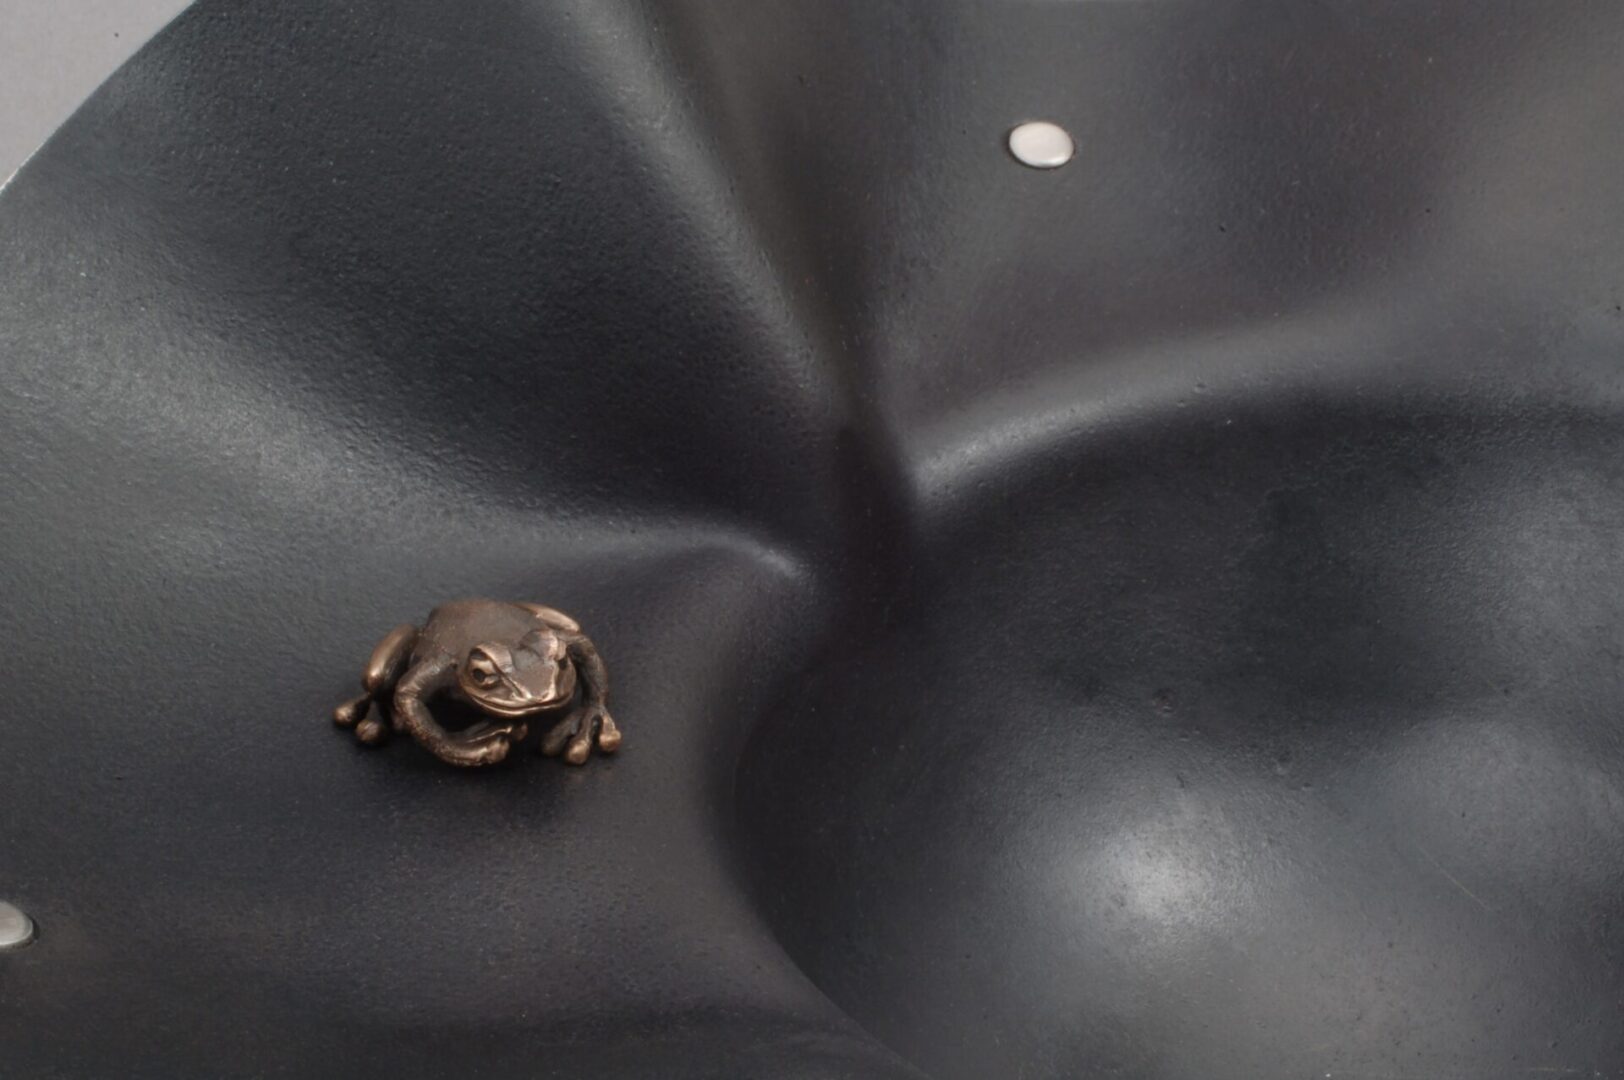 A small frog perched on a black bowl, adorned with Ira Sherman's unique jewelry.